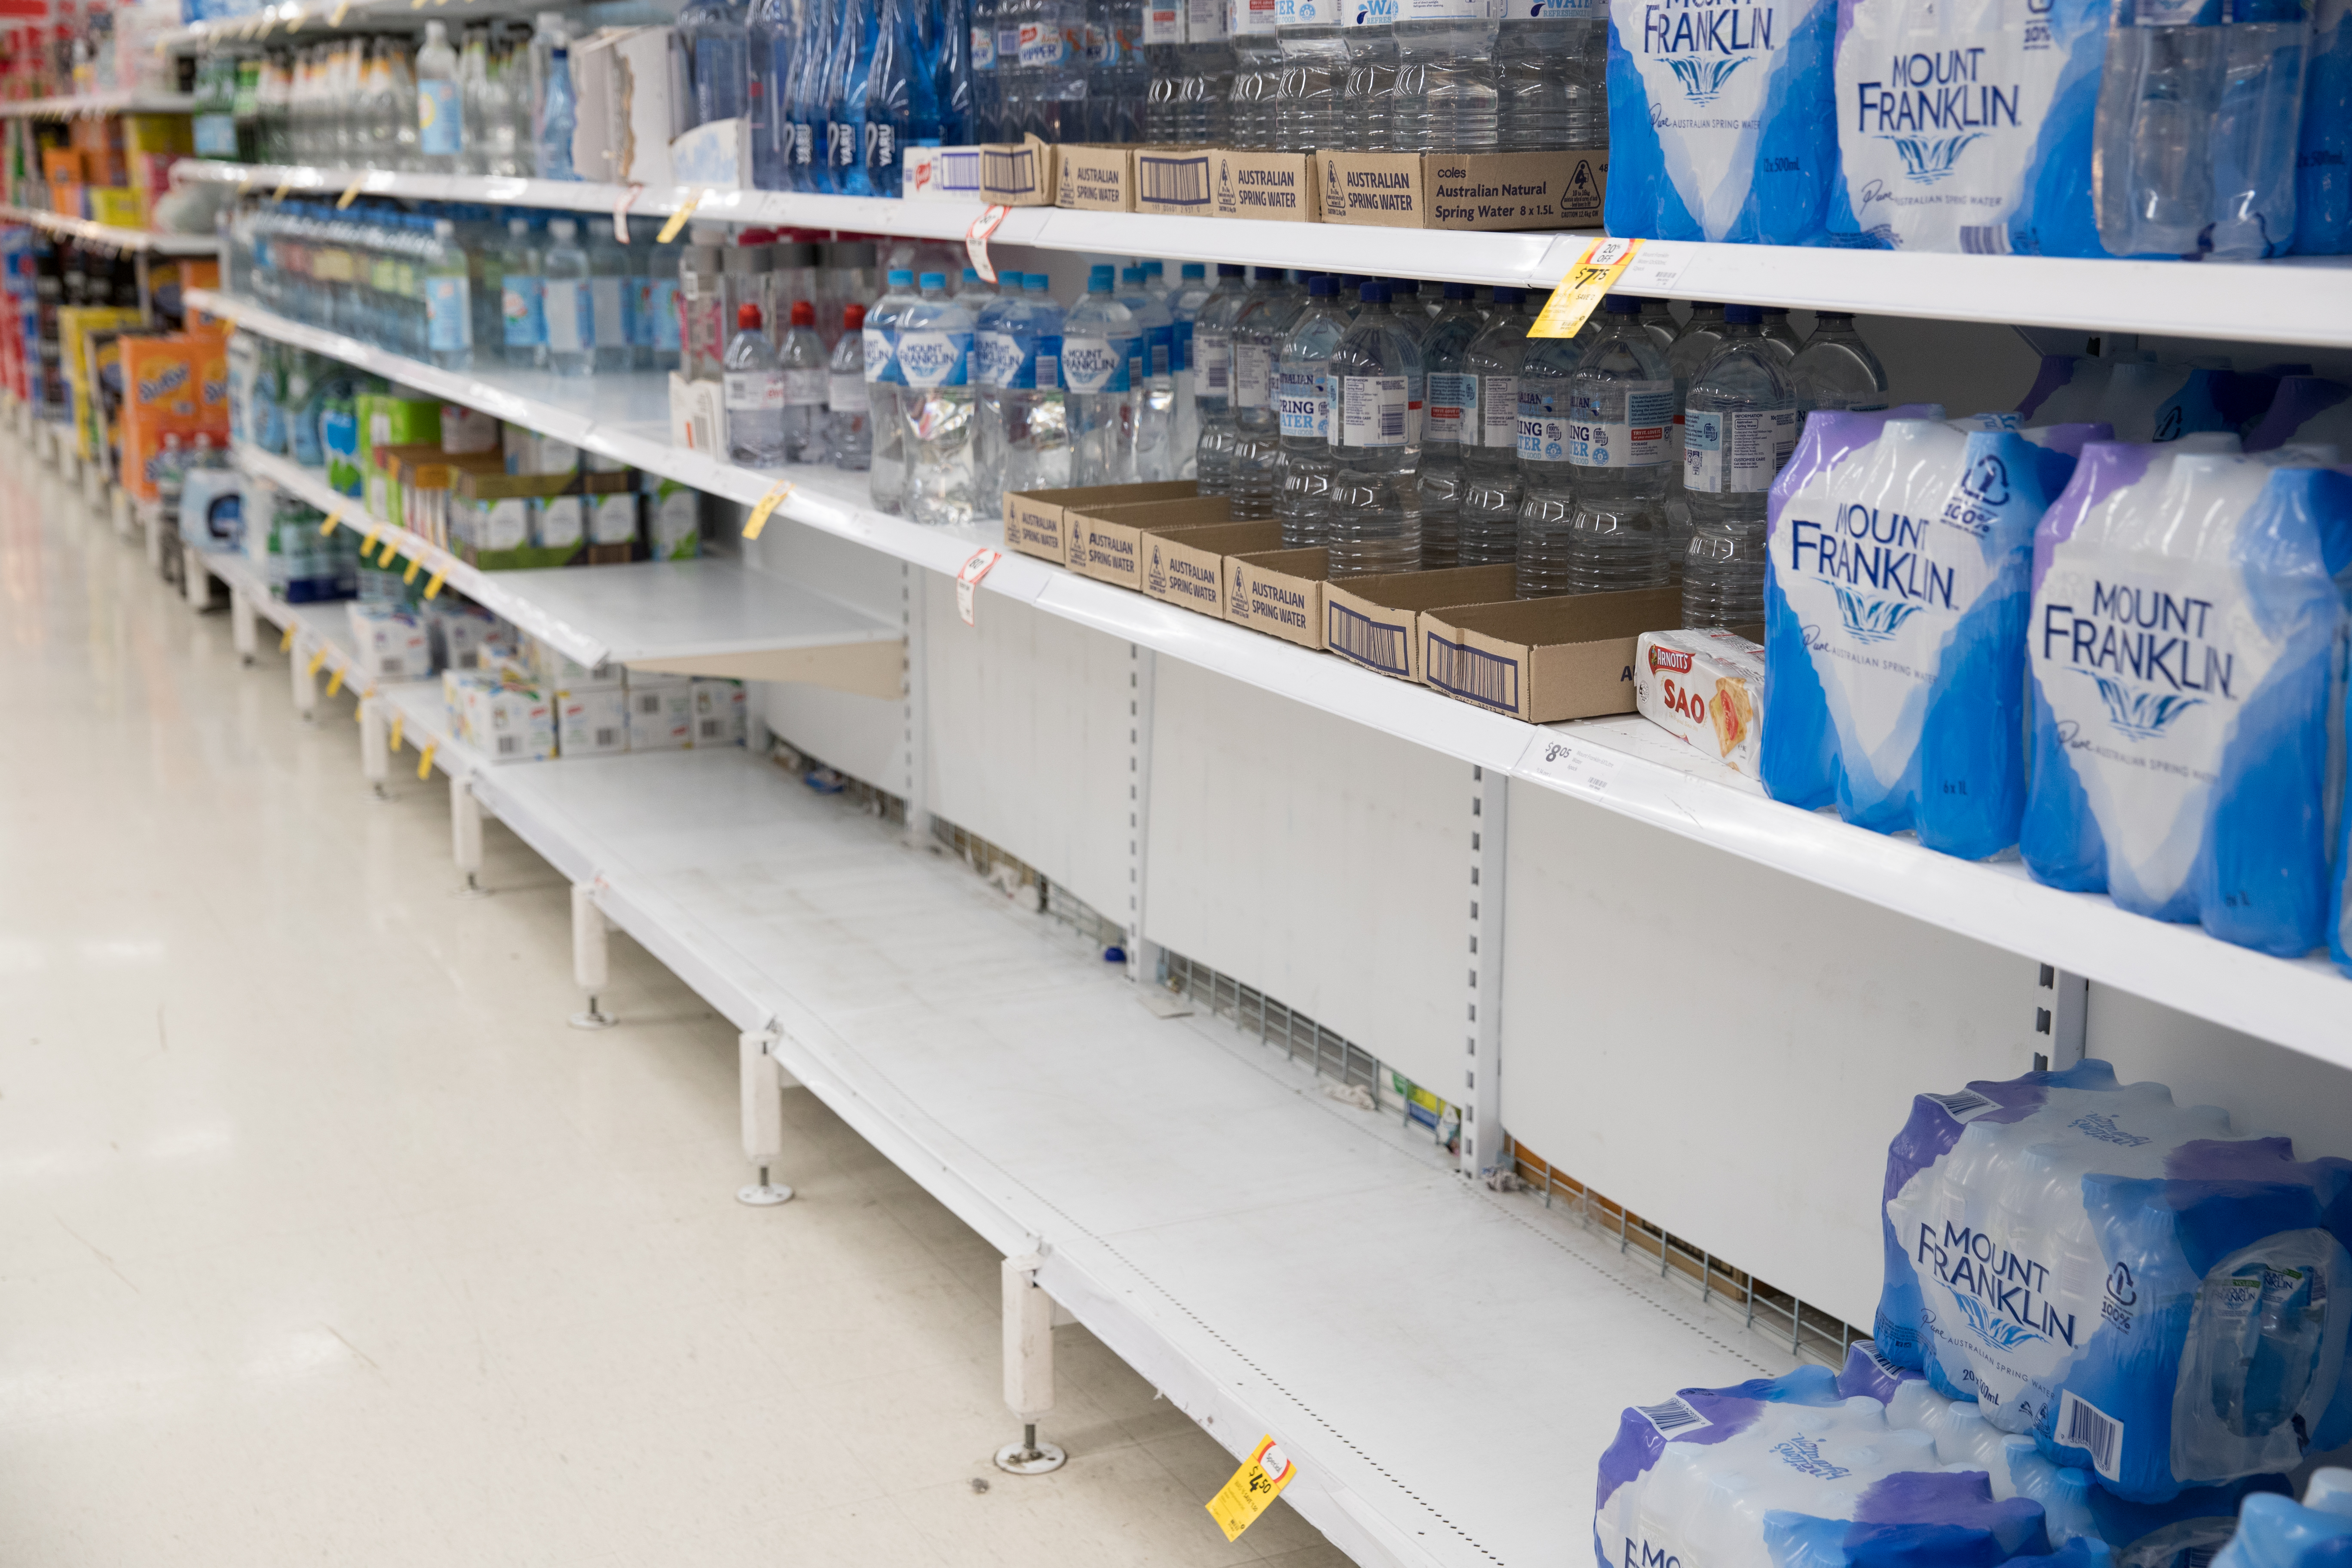 Empty shelves where boxes of water would normally be, in Coles Supermarket, Woy Woy. 